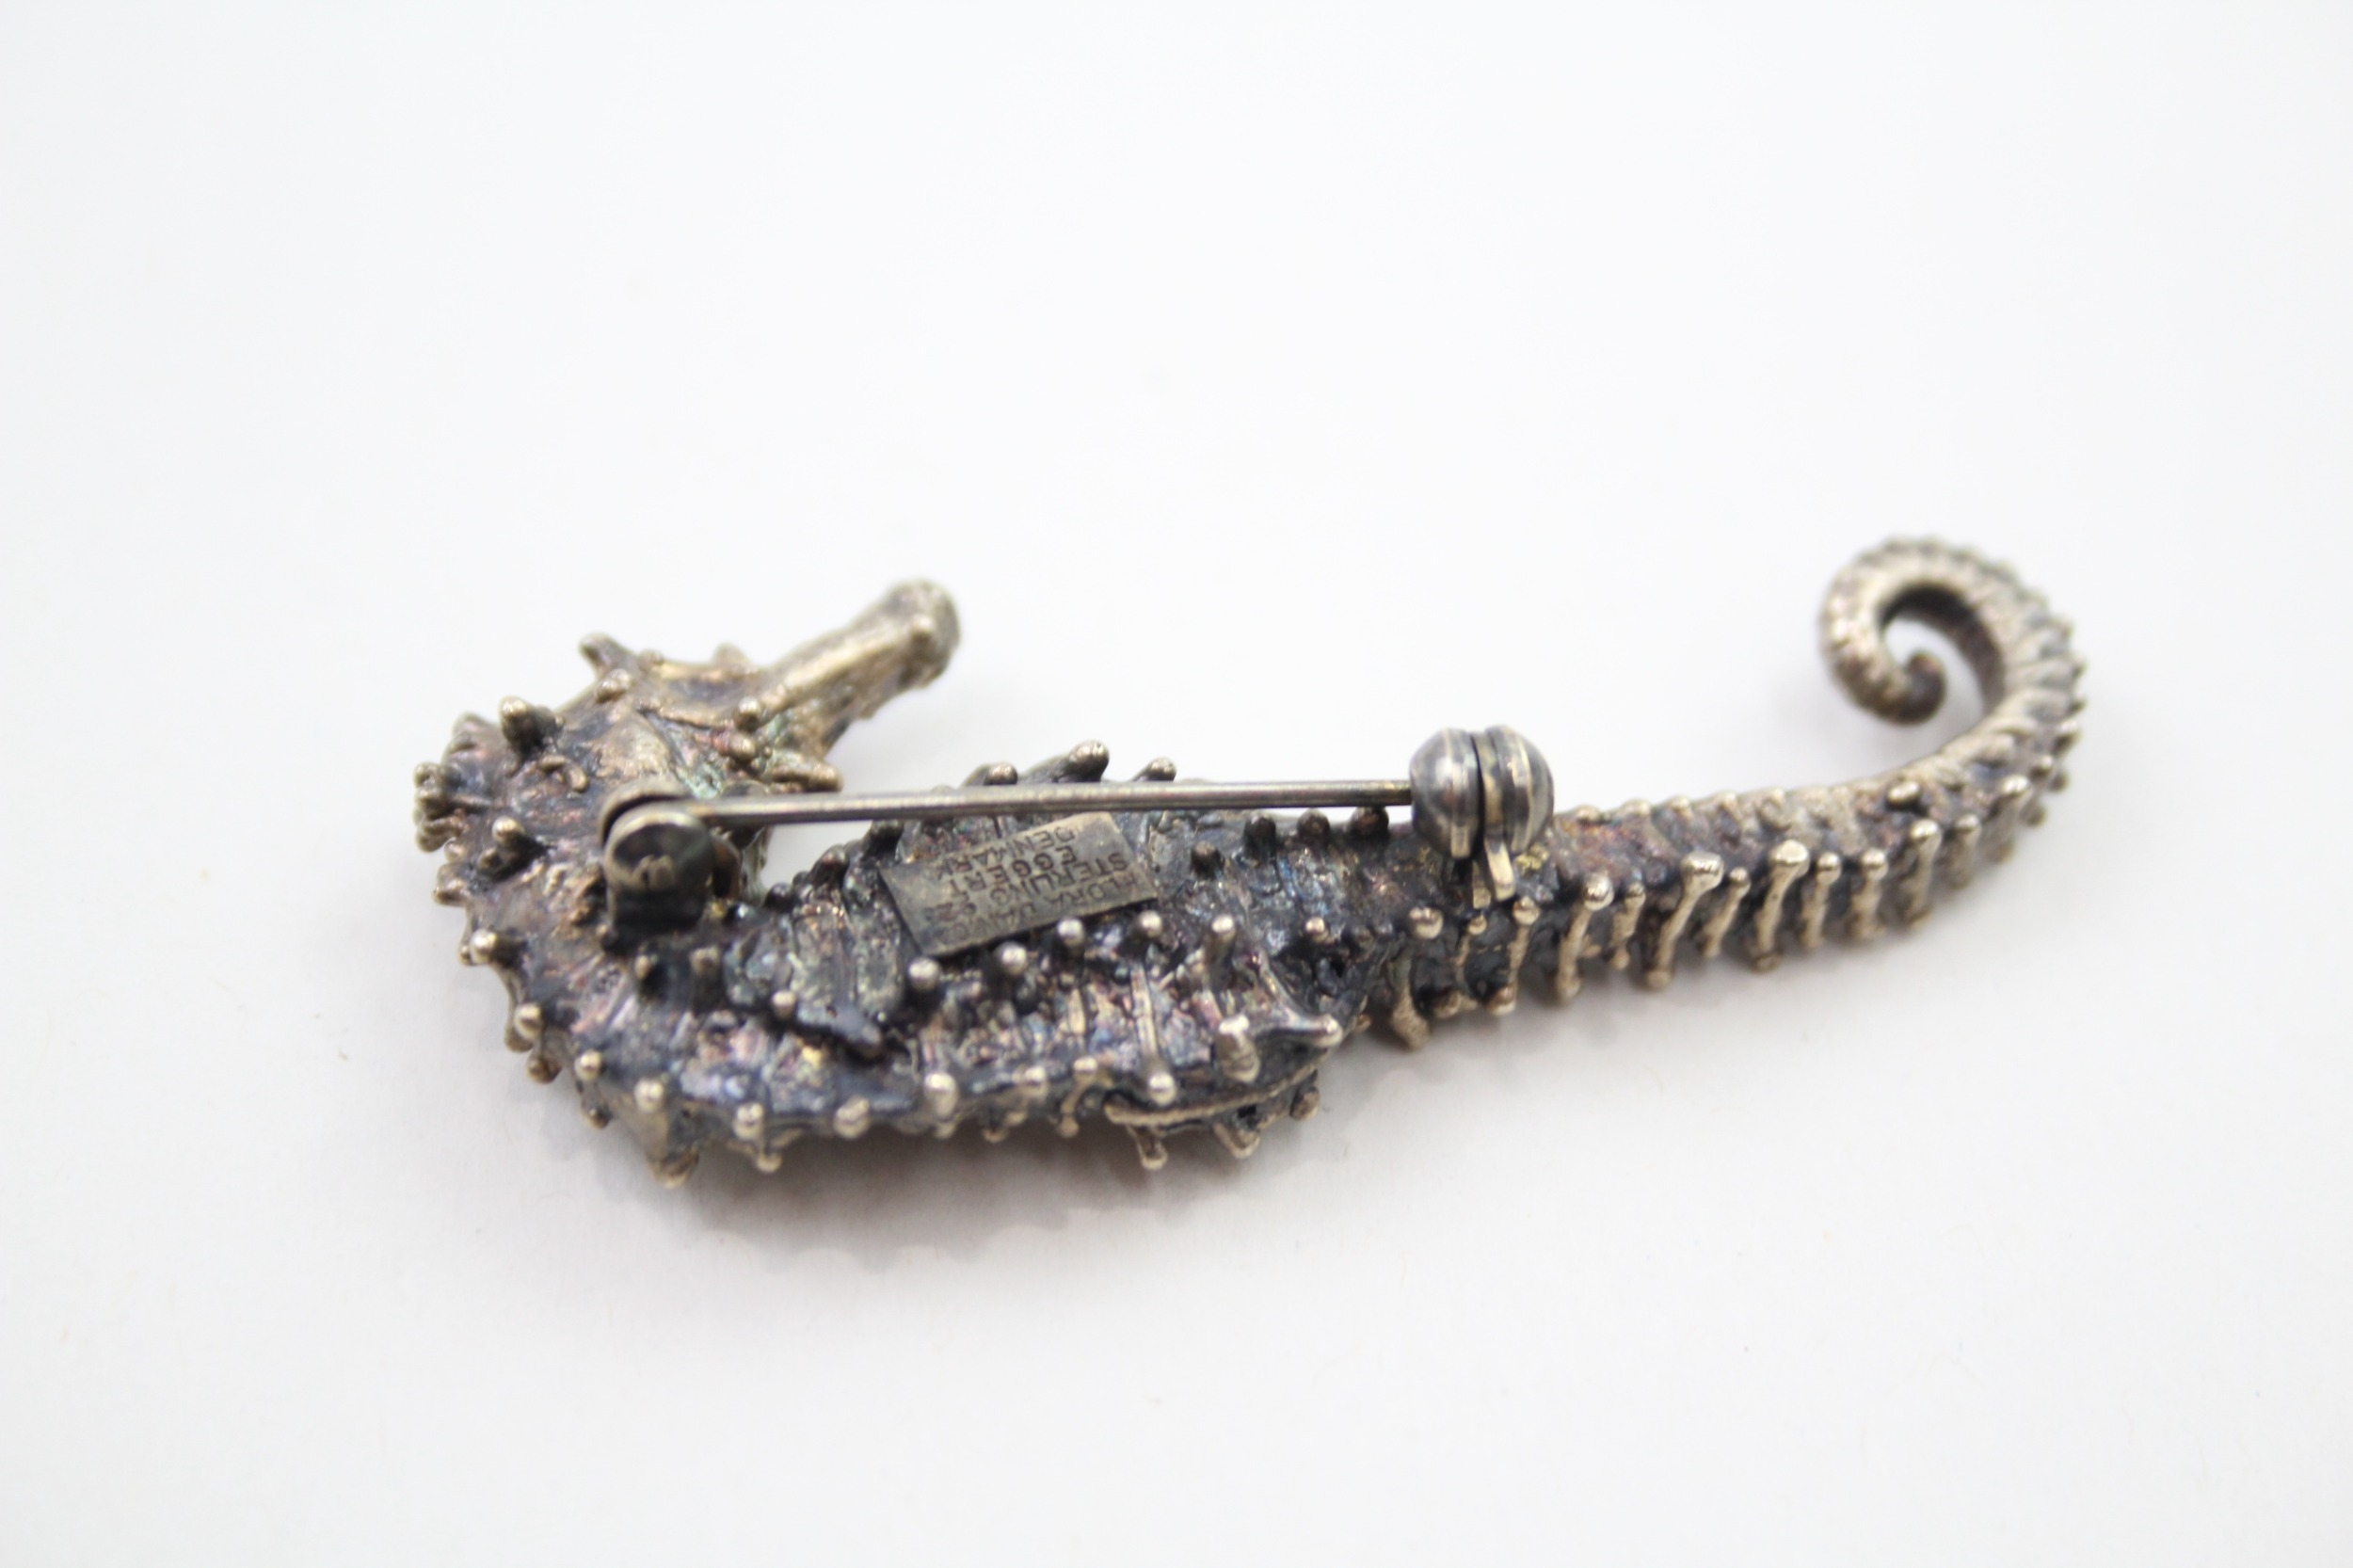 A silver cast seahorse brooch by Flora Danica, Denmark (7g) - Image 4 of 4